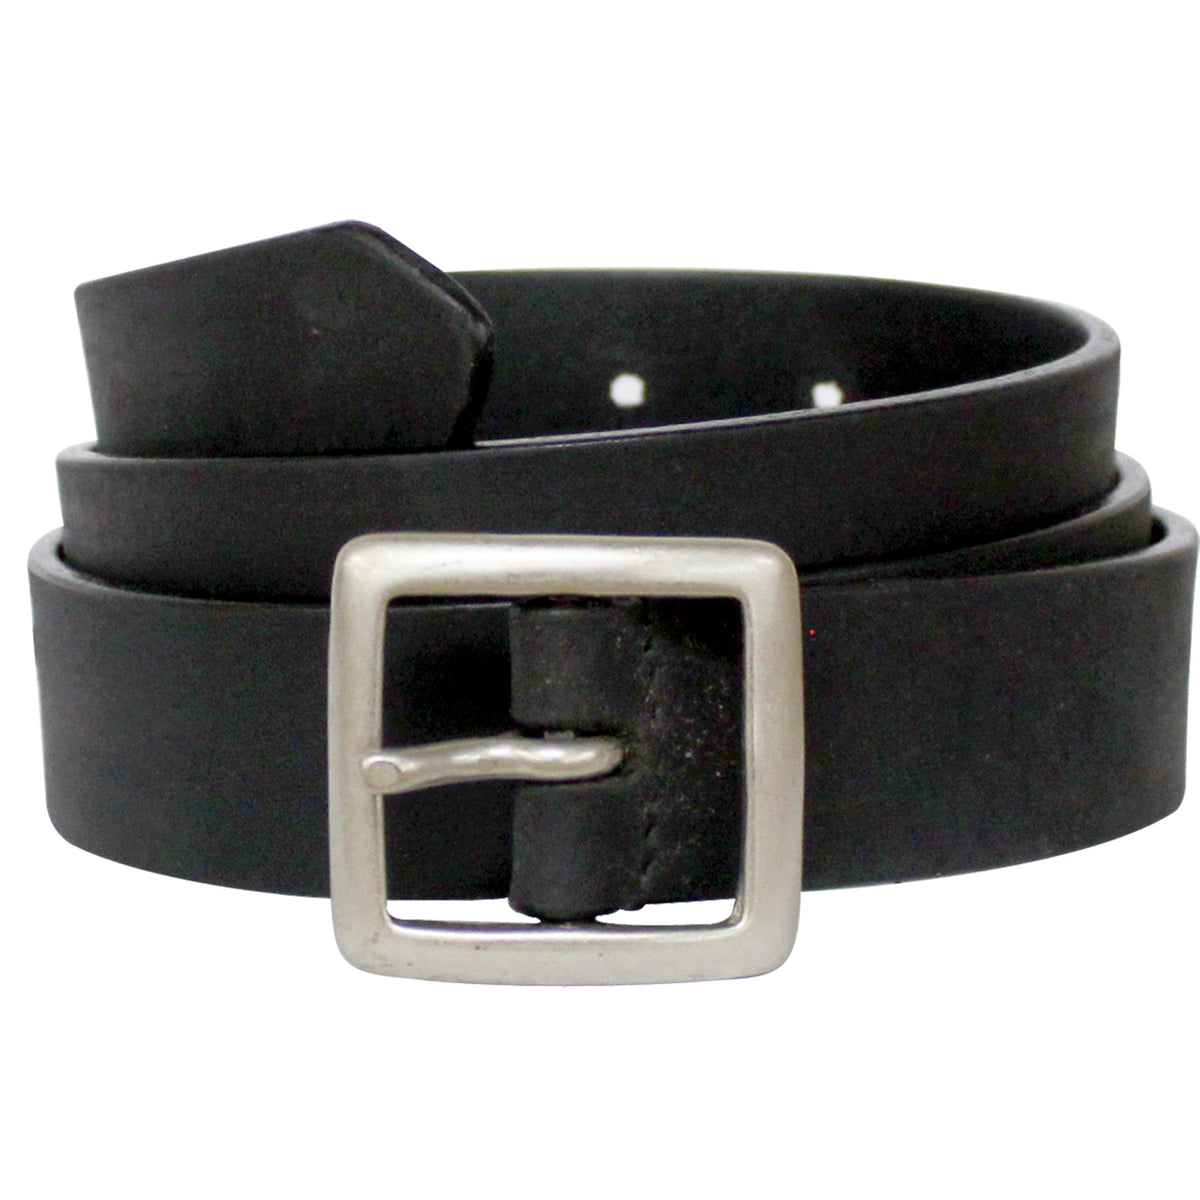 the bison designs classic leather belt in black